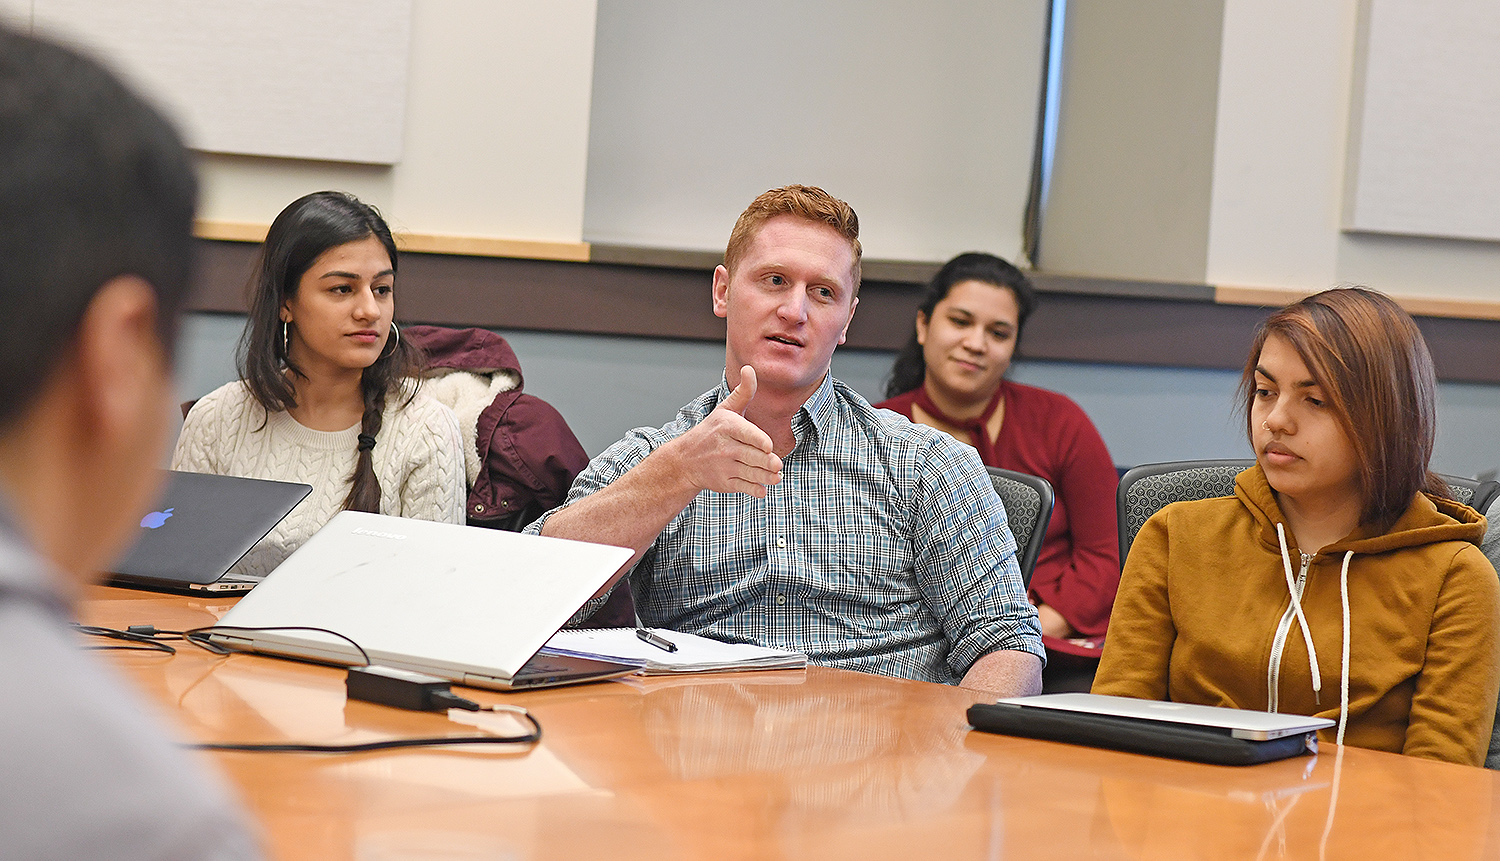 Wesleyan Posse Fellow Lance Williams ’20 speaks about his role with the Wesleyan Design Tank, which uses human-centered design methodologies to facilitate problem-solving locally. Sankriti Malik ’20, at left, also is involved with the Design Tank. Pictured in back is Rhea Drozdenko ’18, the 2017/2018 Civic Engagement Fellow, and at right is Kelly Acevedo ’20 who is creating Caput Productions through the Patricelli Center. 